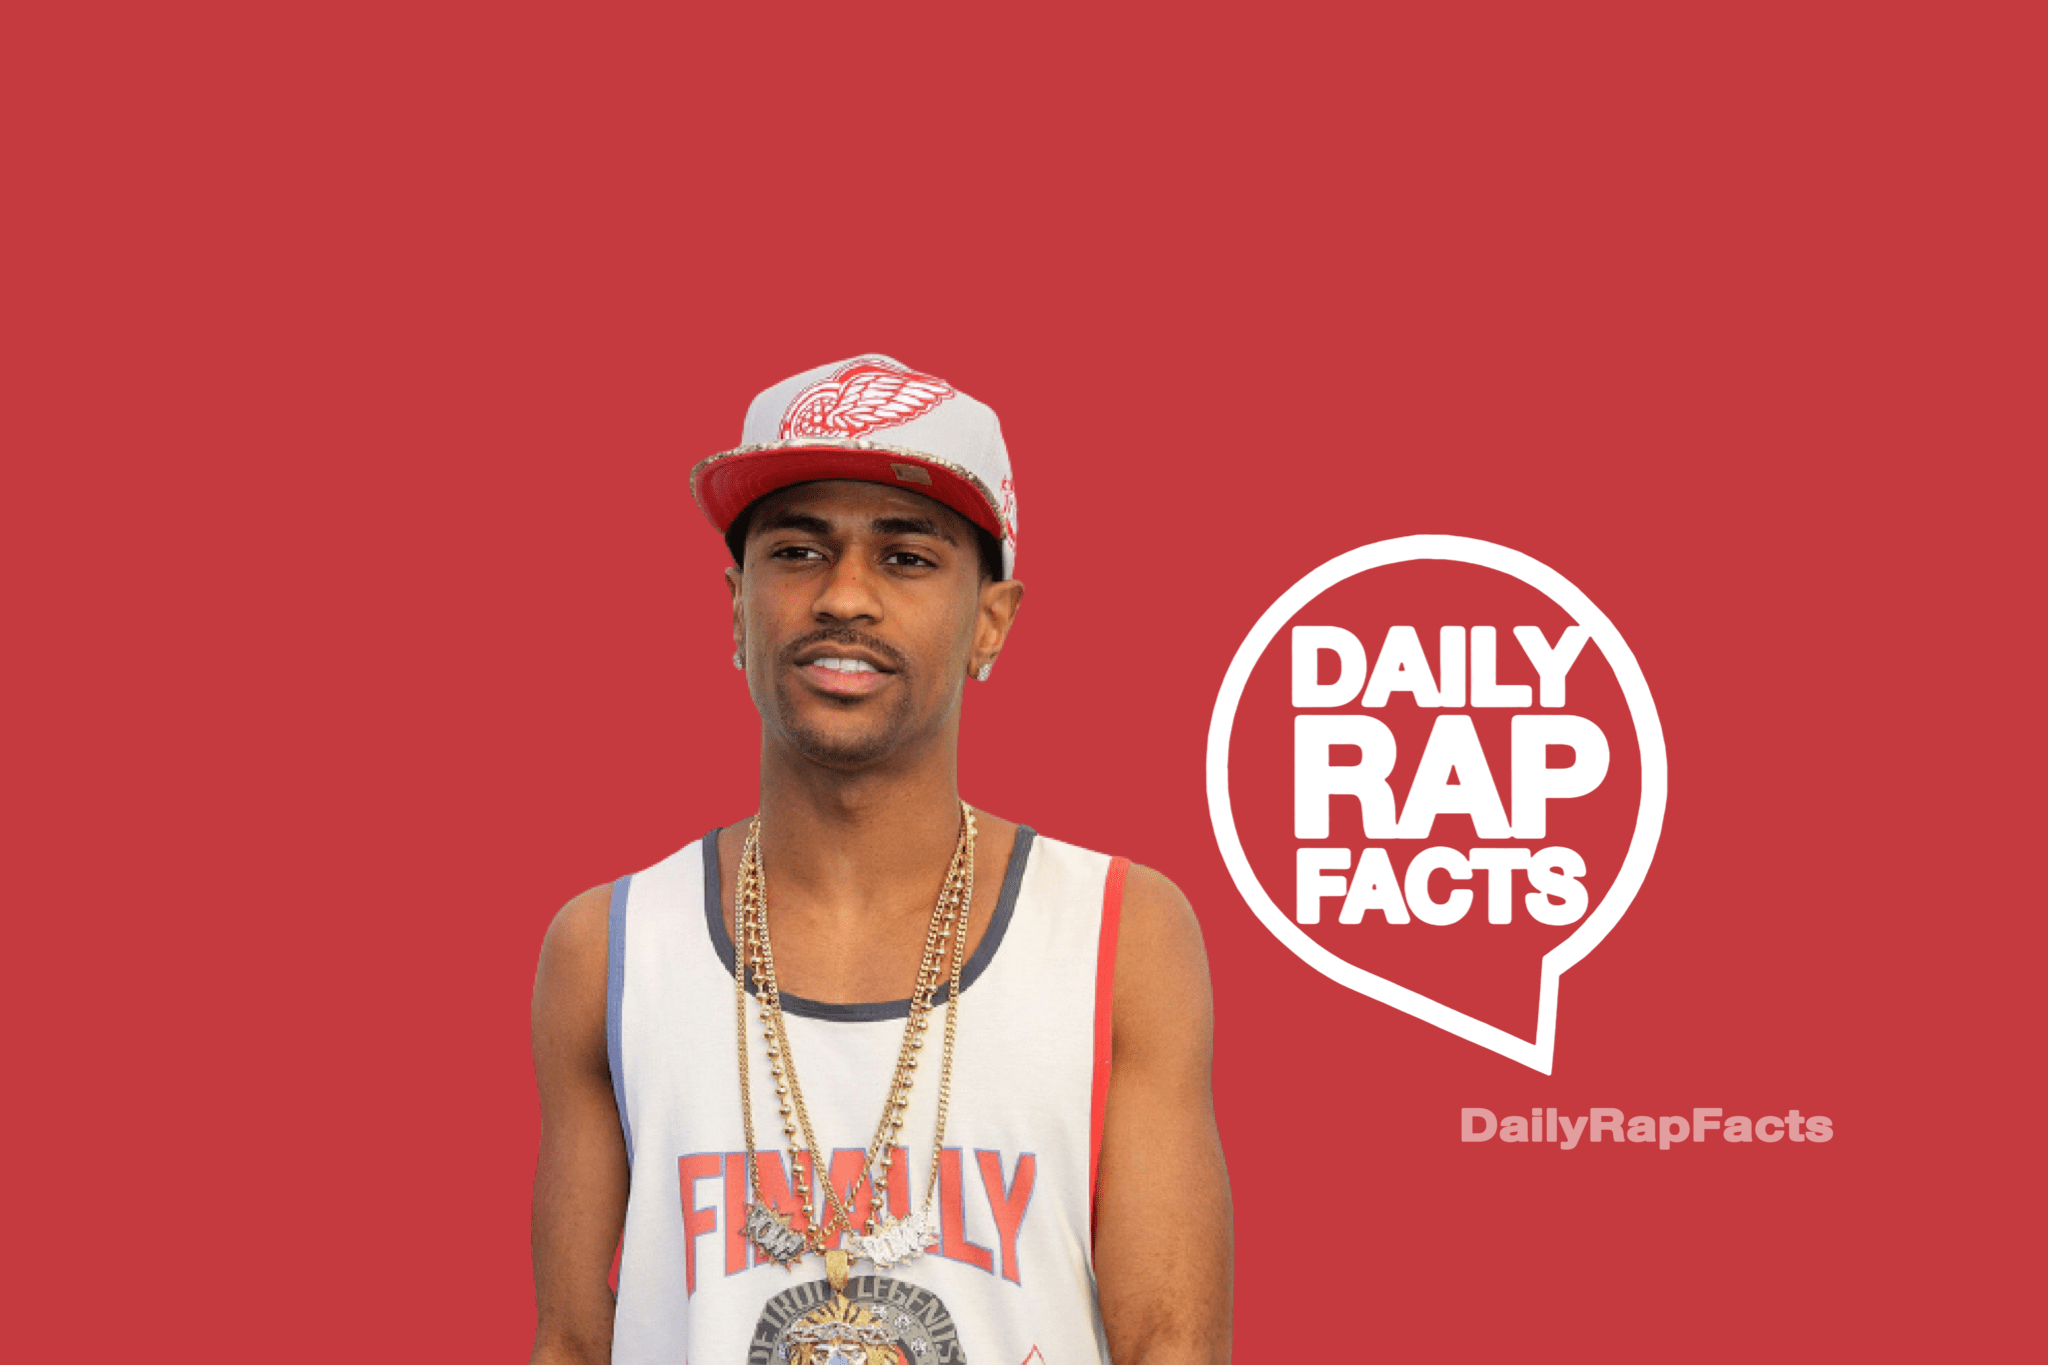 Big Sean says the word “ass” 106 times in 'Dance (A$$)'